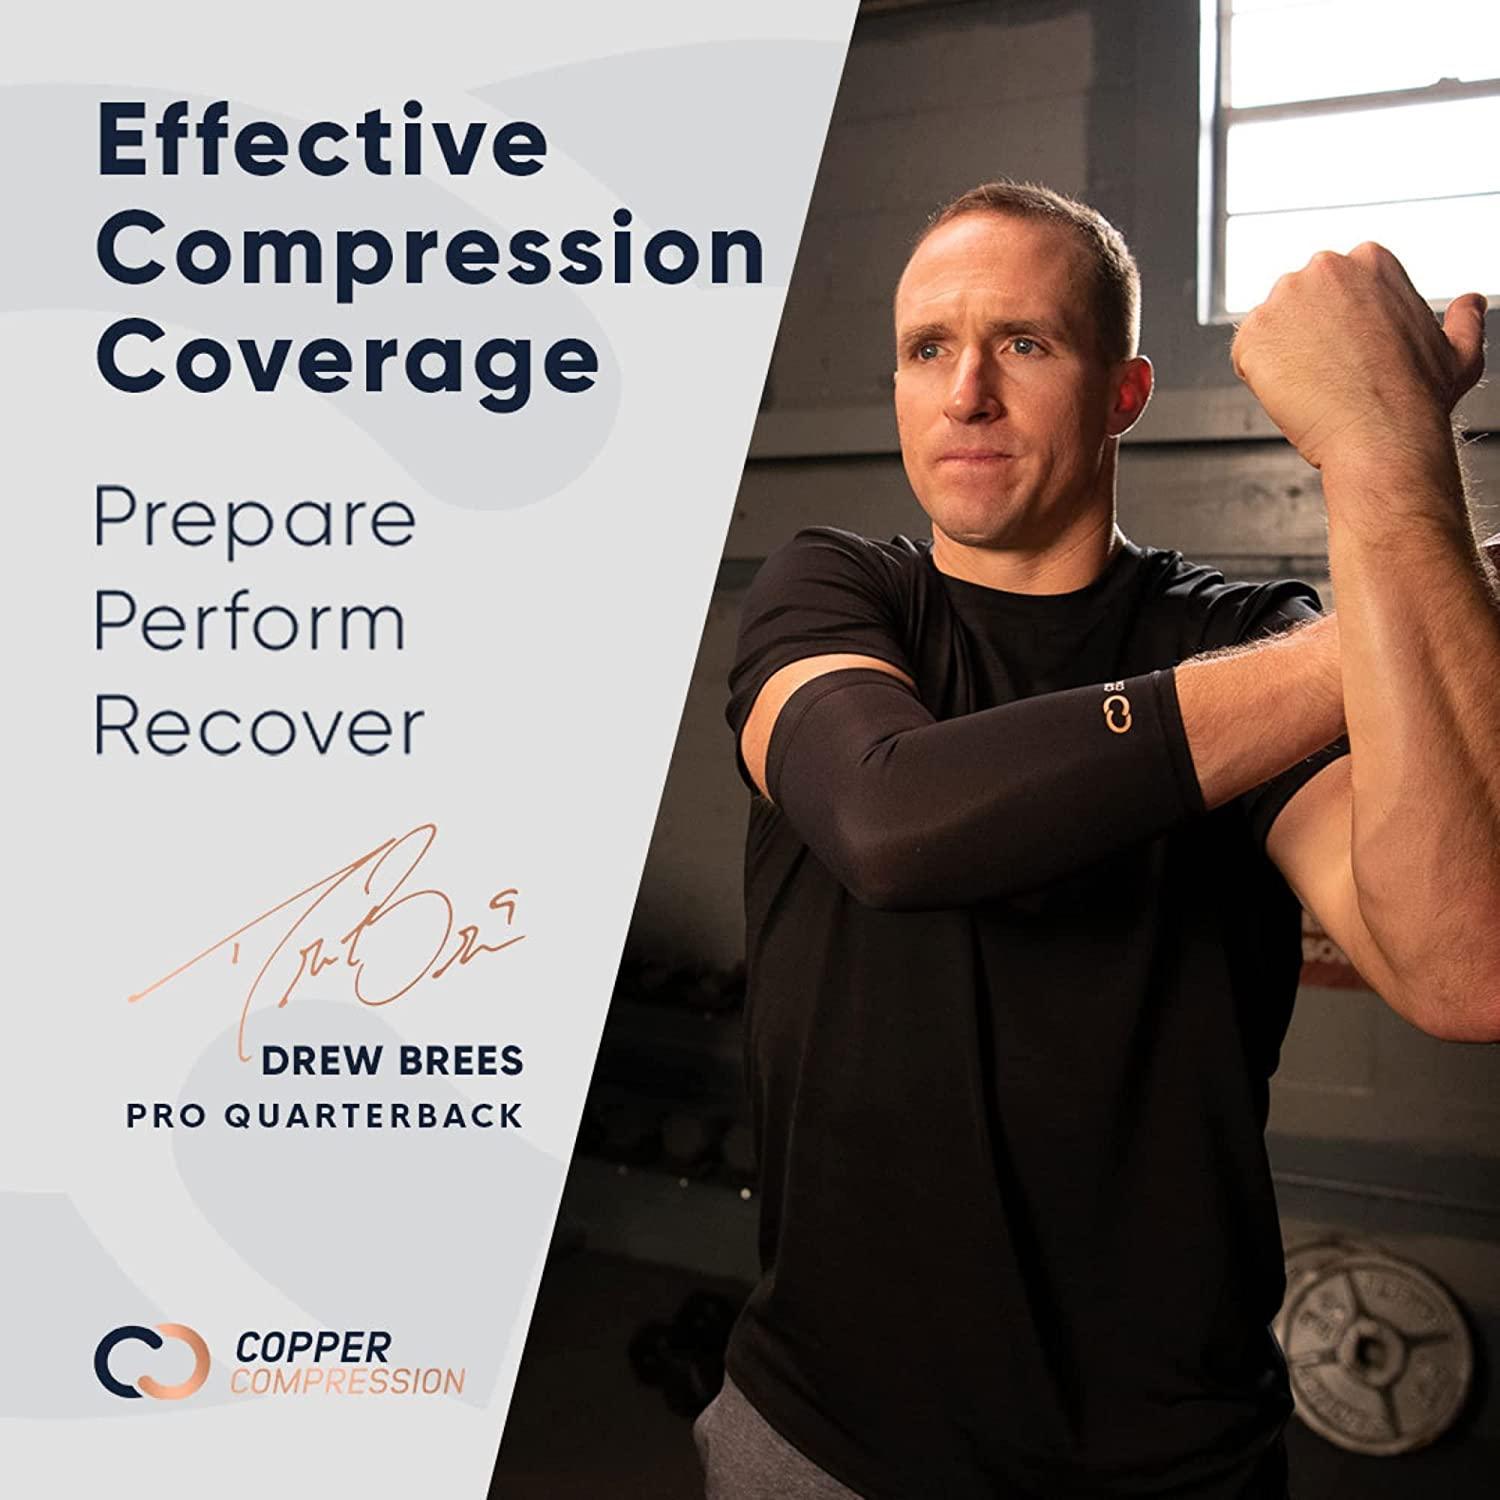 Copper Compression Hamstring Support Sleeve - Copper Infused Anti